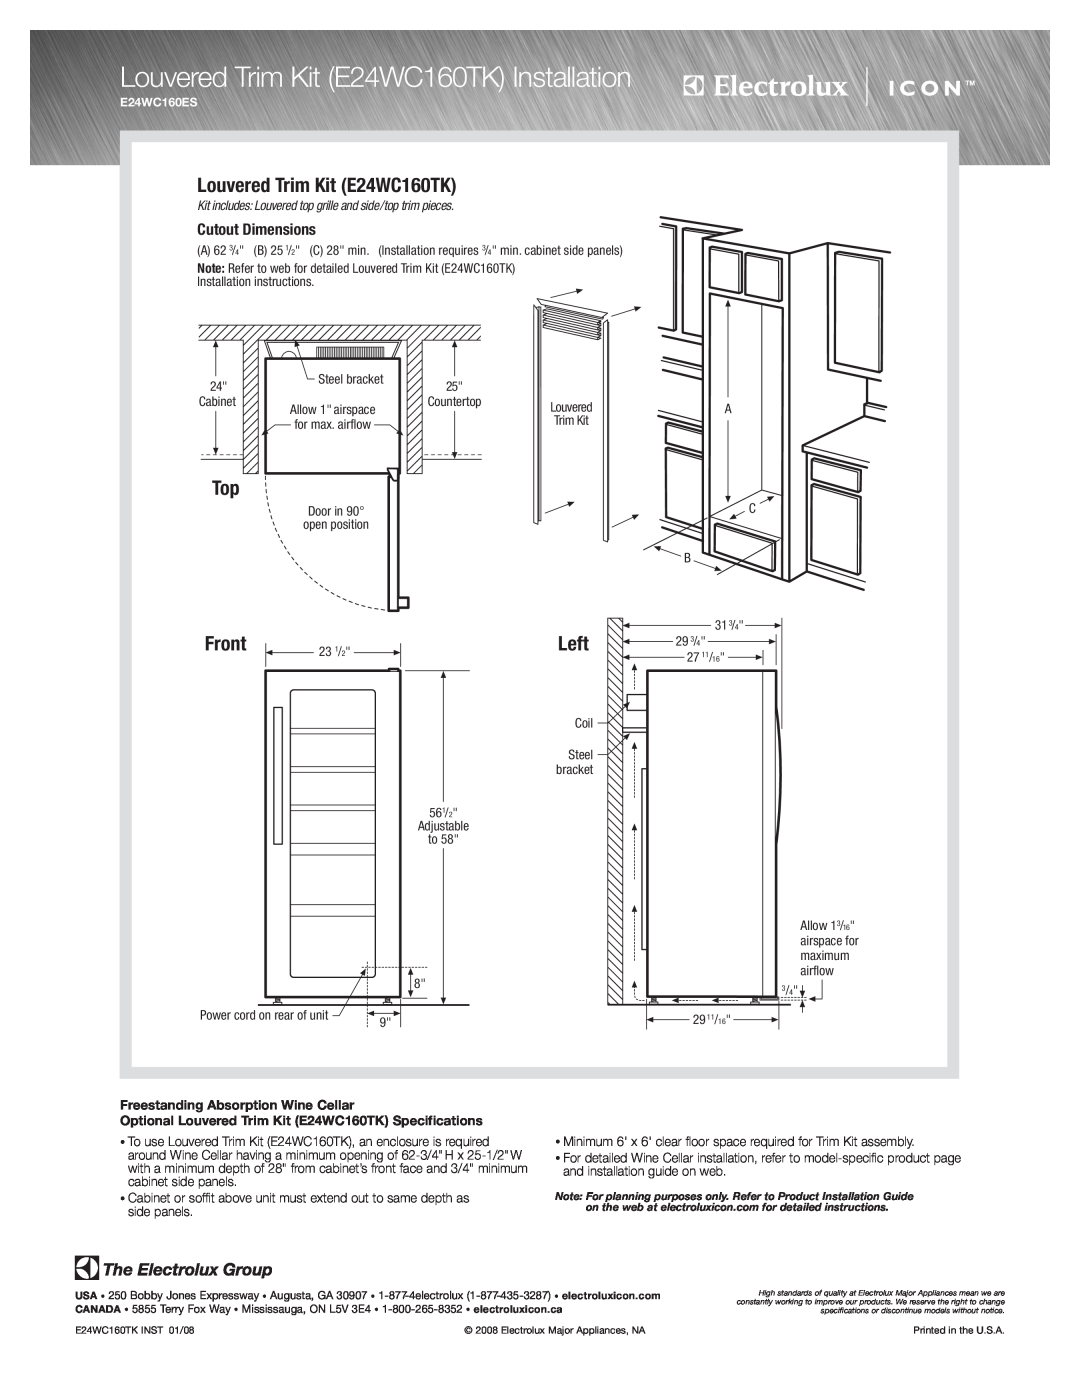 Electrolux E23CS78GSS Louvered Trim Kit E24WC160TK Installation, Front, Left, Freestanding Absorption Wine Cellar 